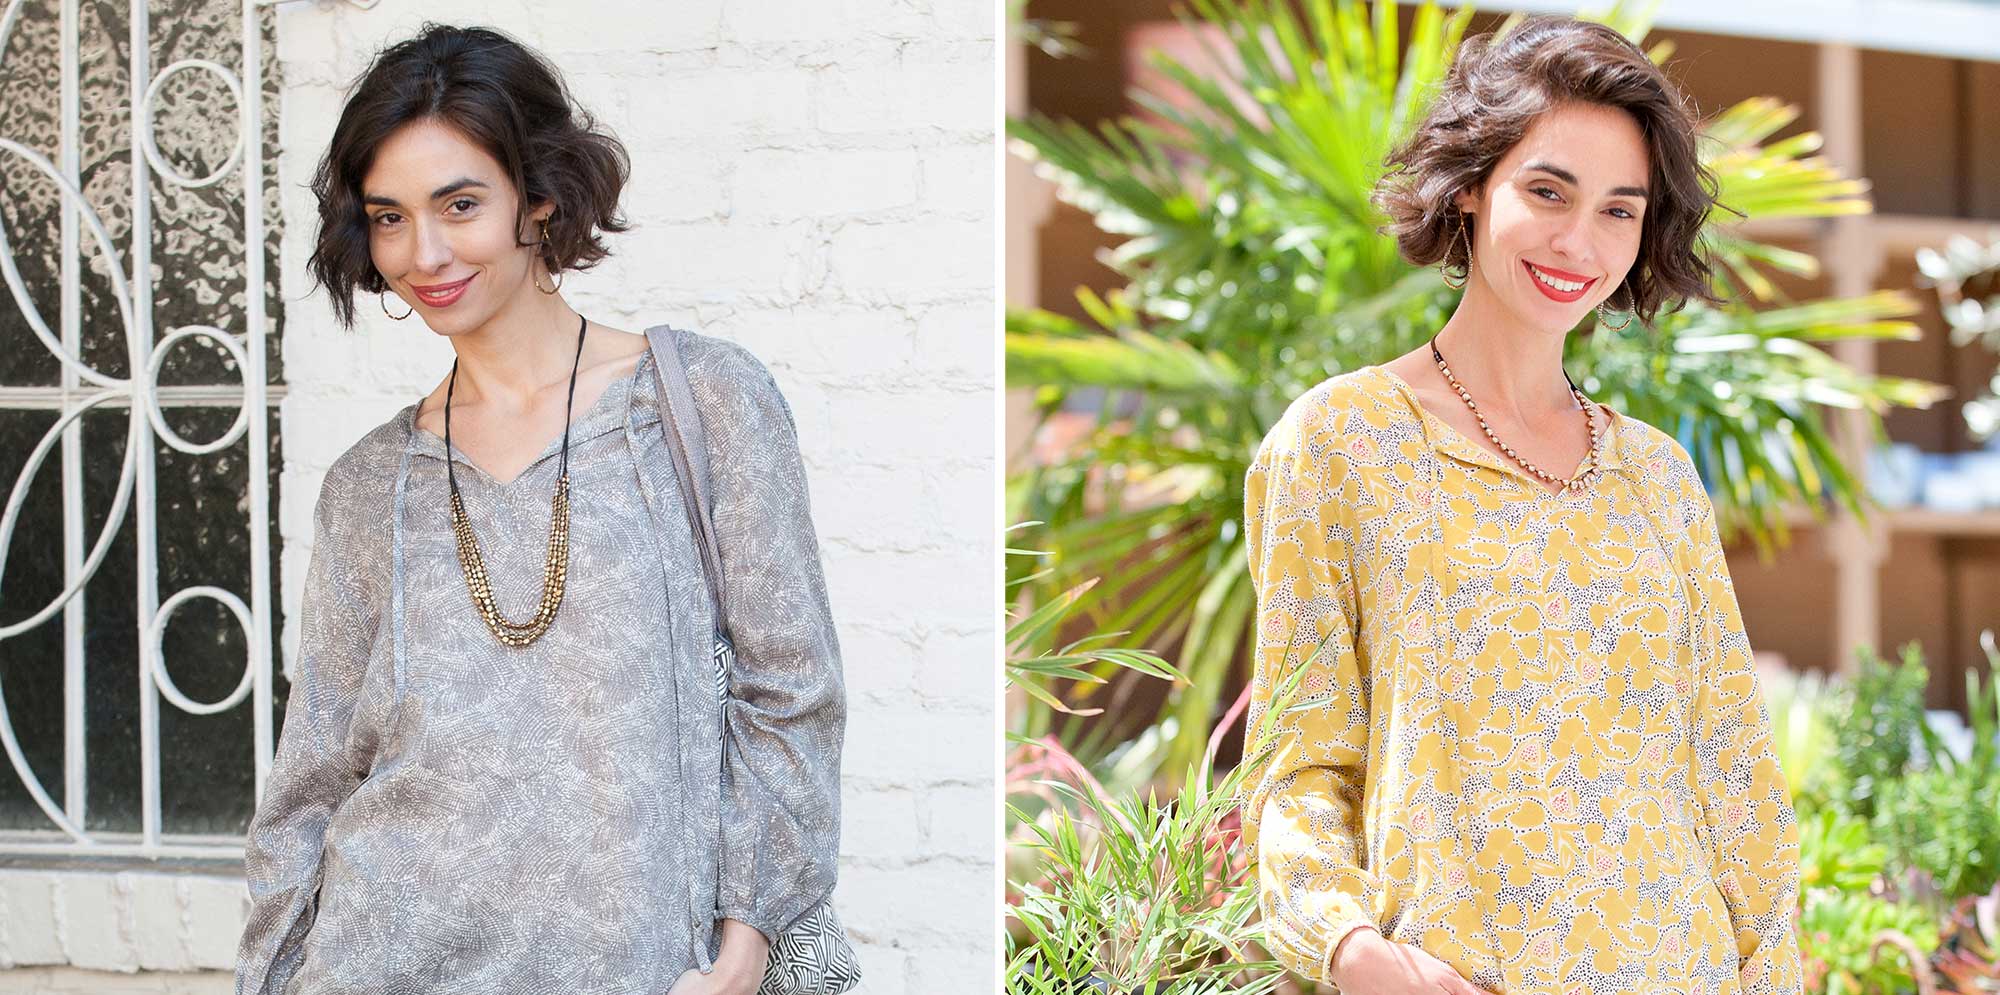 comparison image of woman wearing peasant blouse with long necklace and short necklace